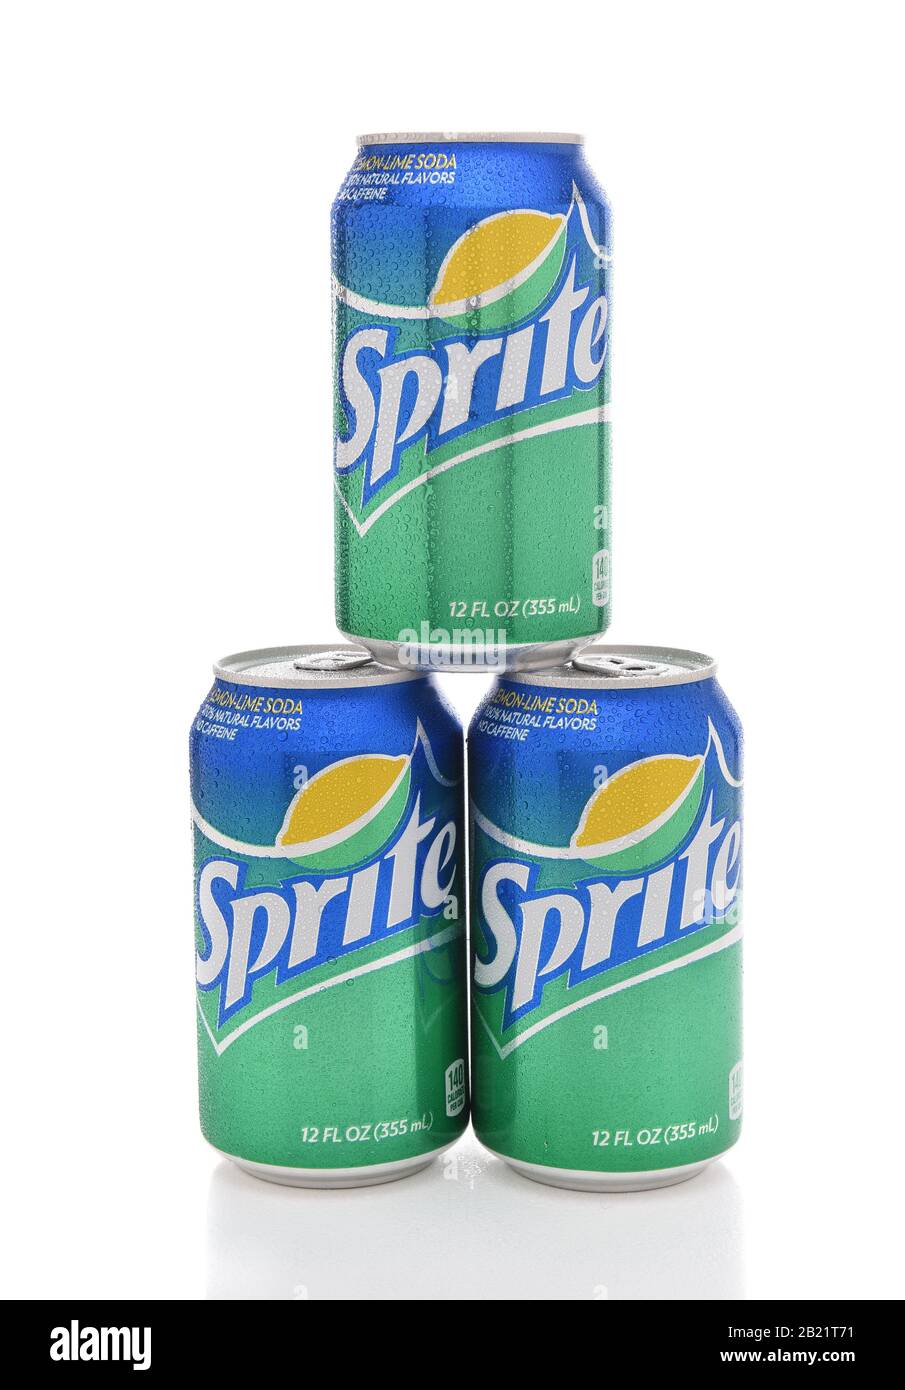 IRVINE, CALIFORNIA - JULY 10, 2017: Three Sprite Cans with condensation. Sprite is a lemon lime soft drink from the Coca-Cola Comapny. Stock Photo